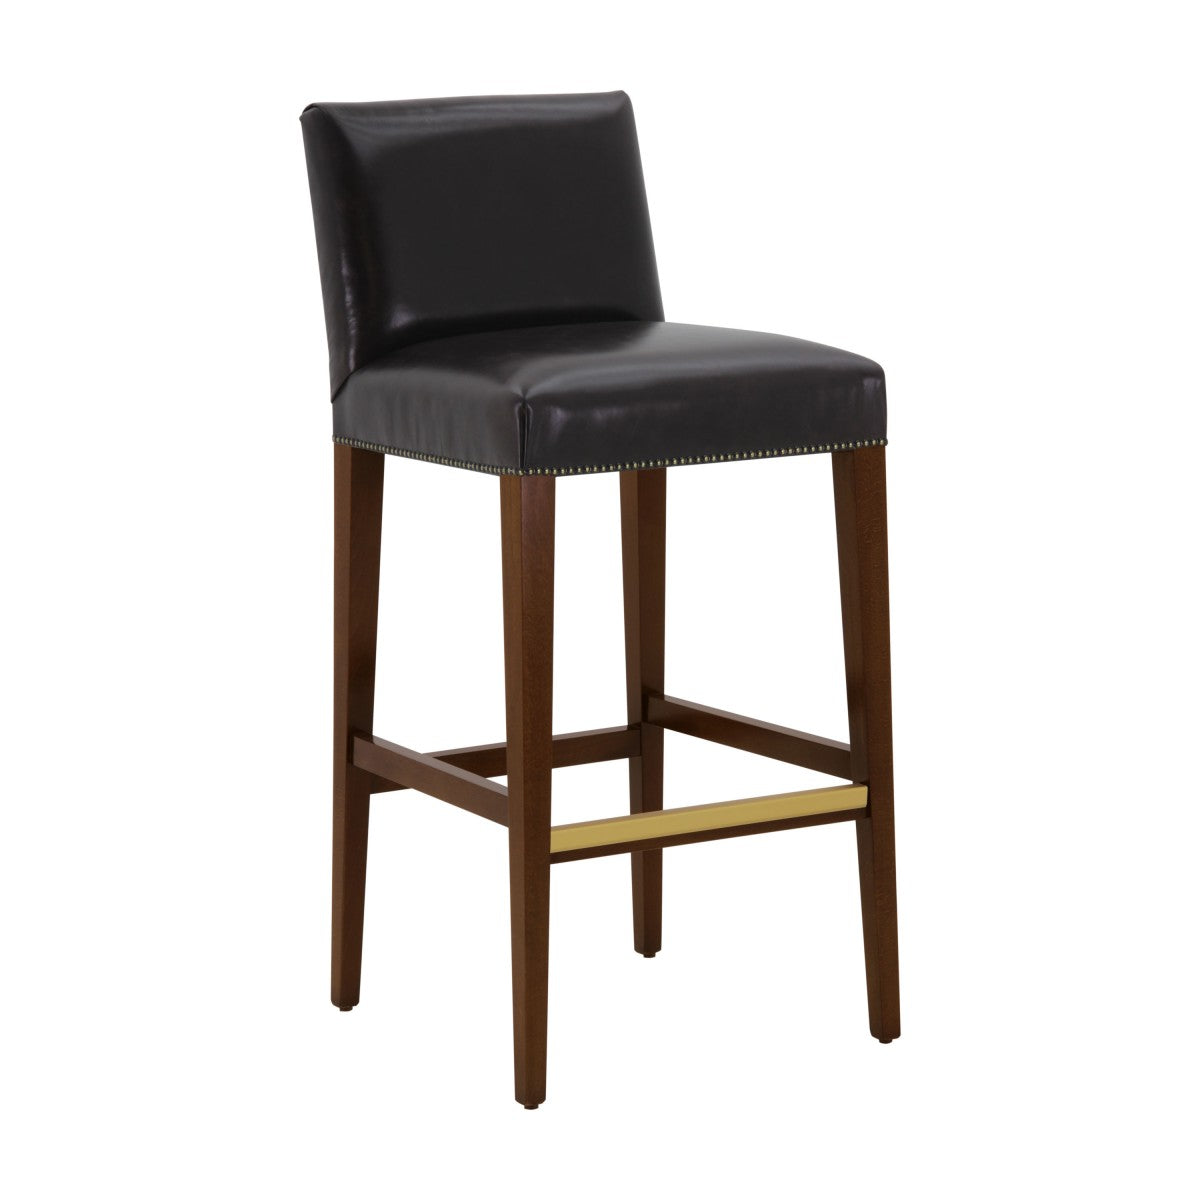 Ariana Bespoke Upholstered Contemporary Low Back Kitchen Barstool MS324B Custom Made To Order